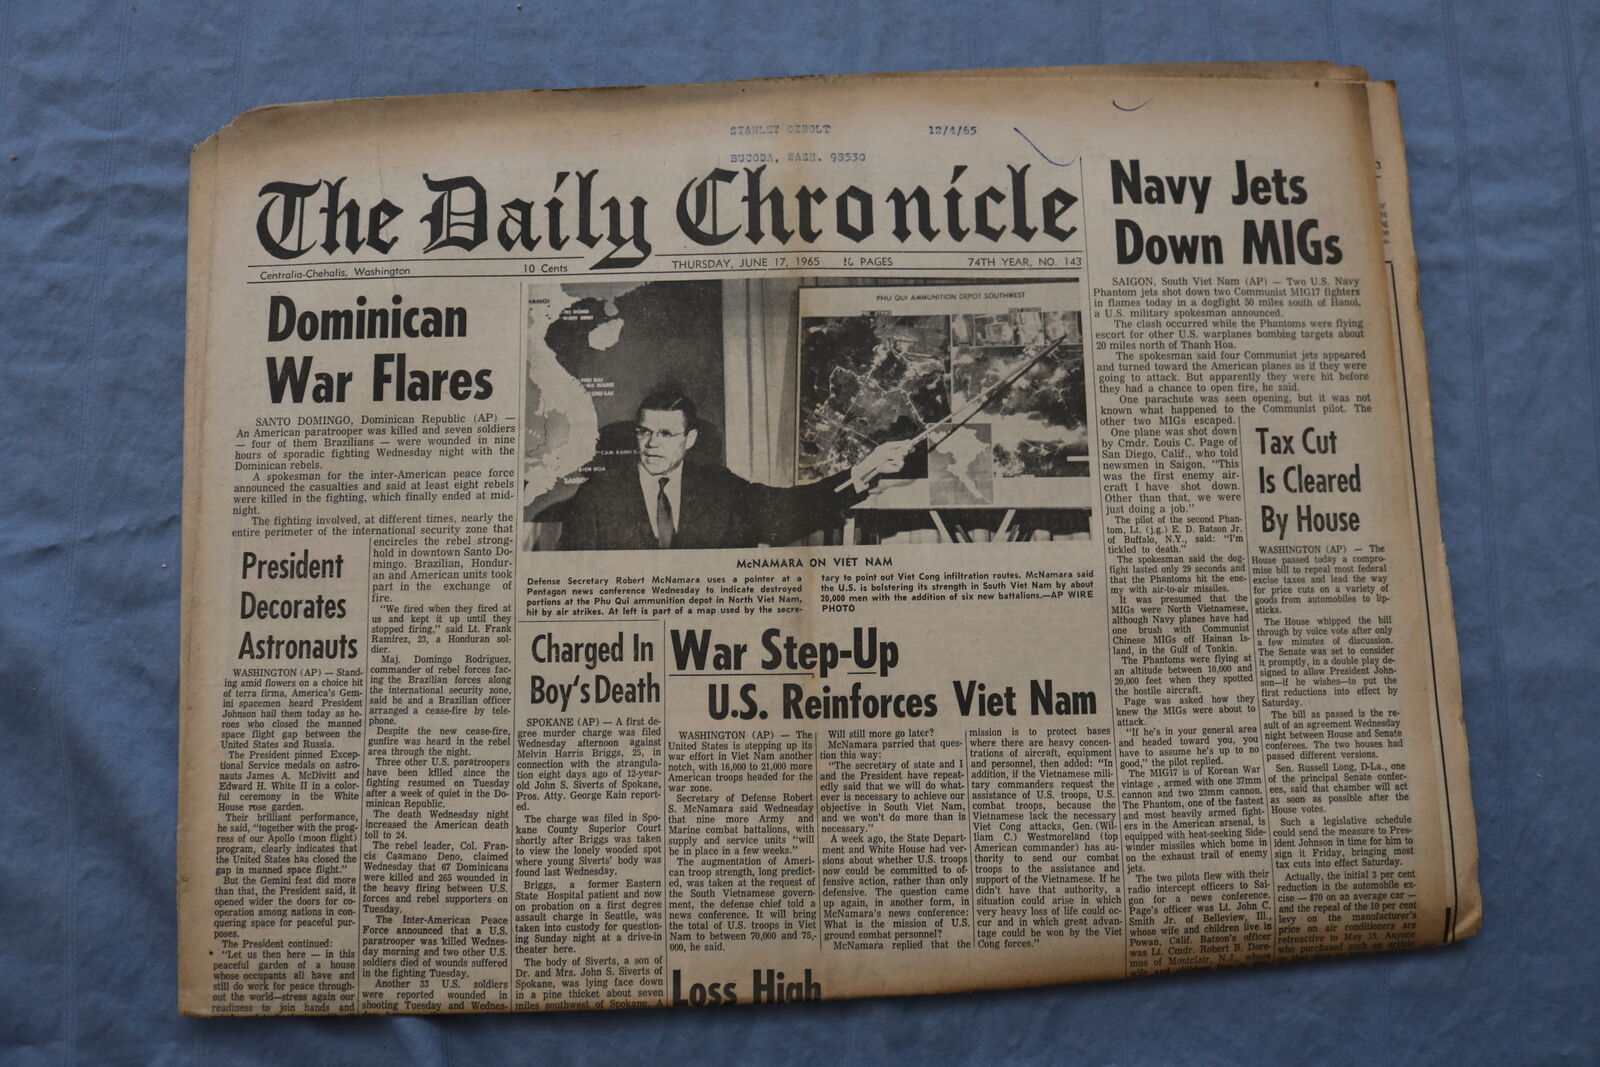 1965 JUNE 17 THE DAILY CHRONICLE NEWSPAPER - NAVY JETS DOWN MIGS - NP 8525